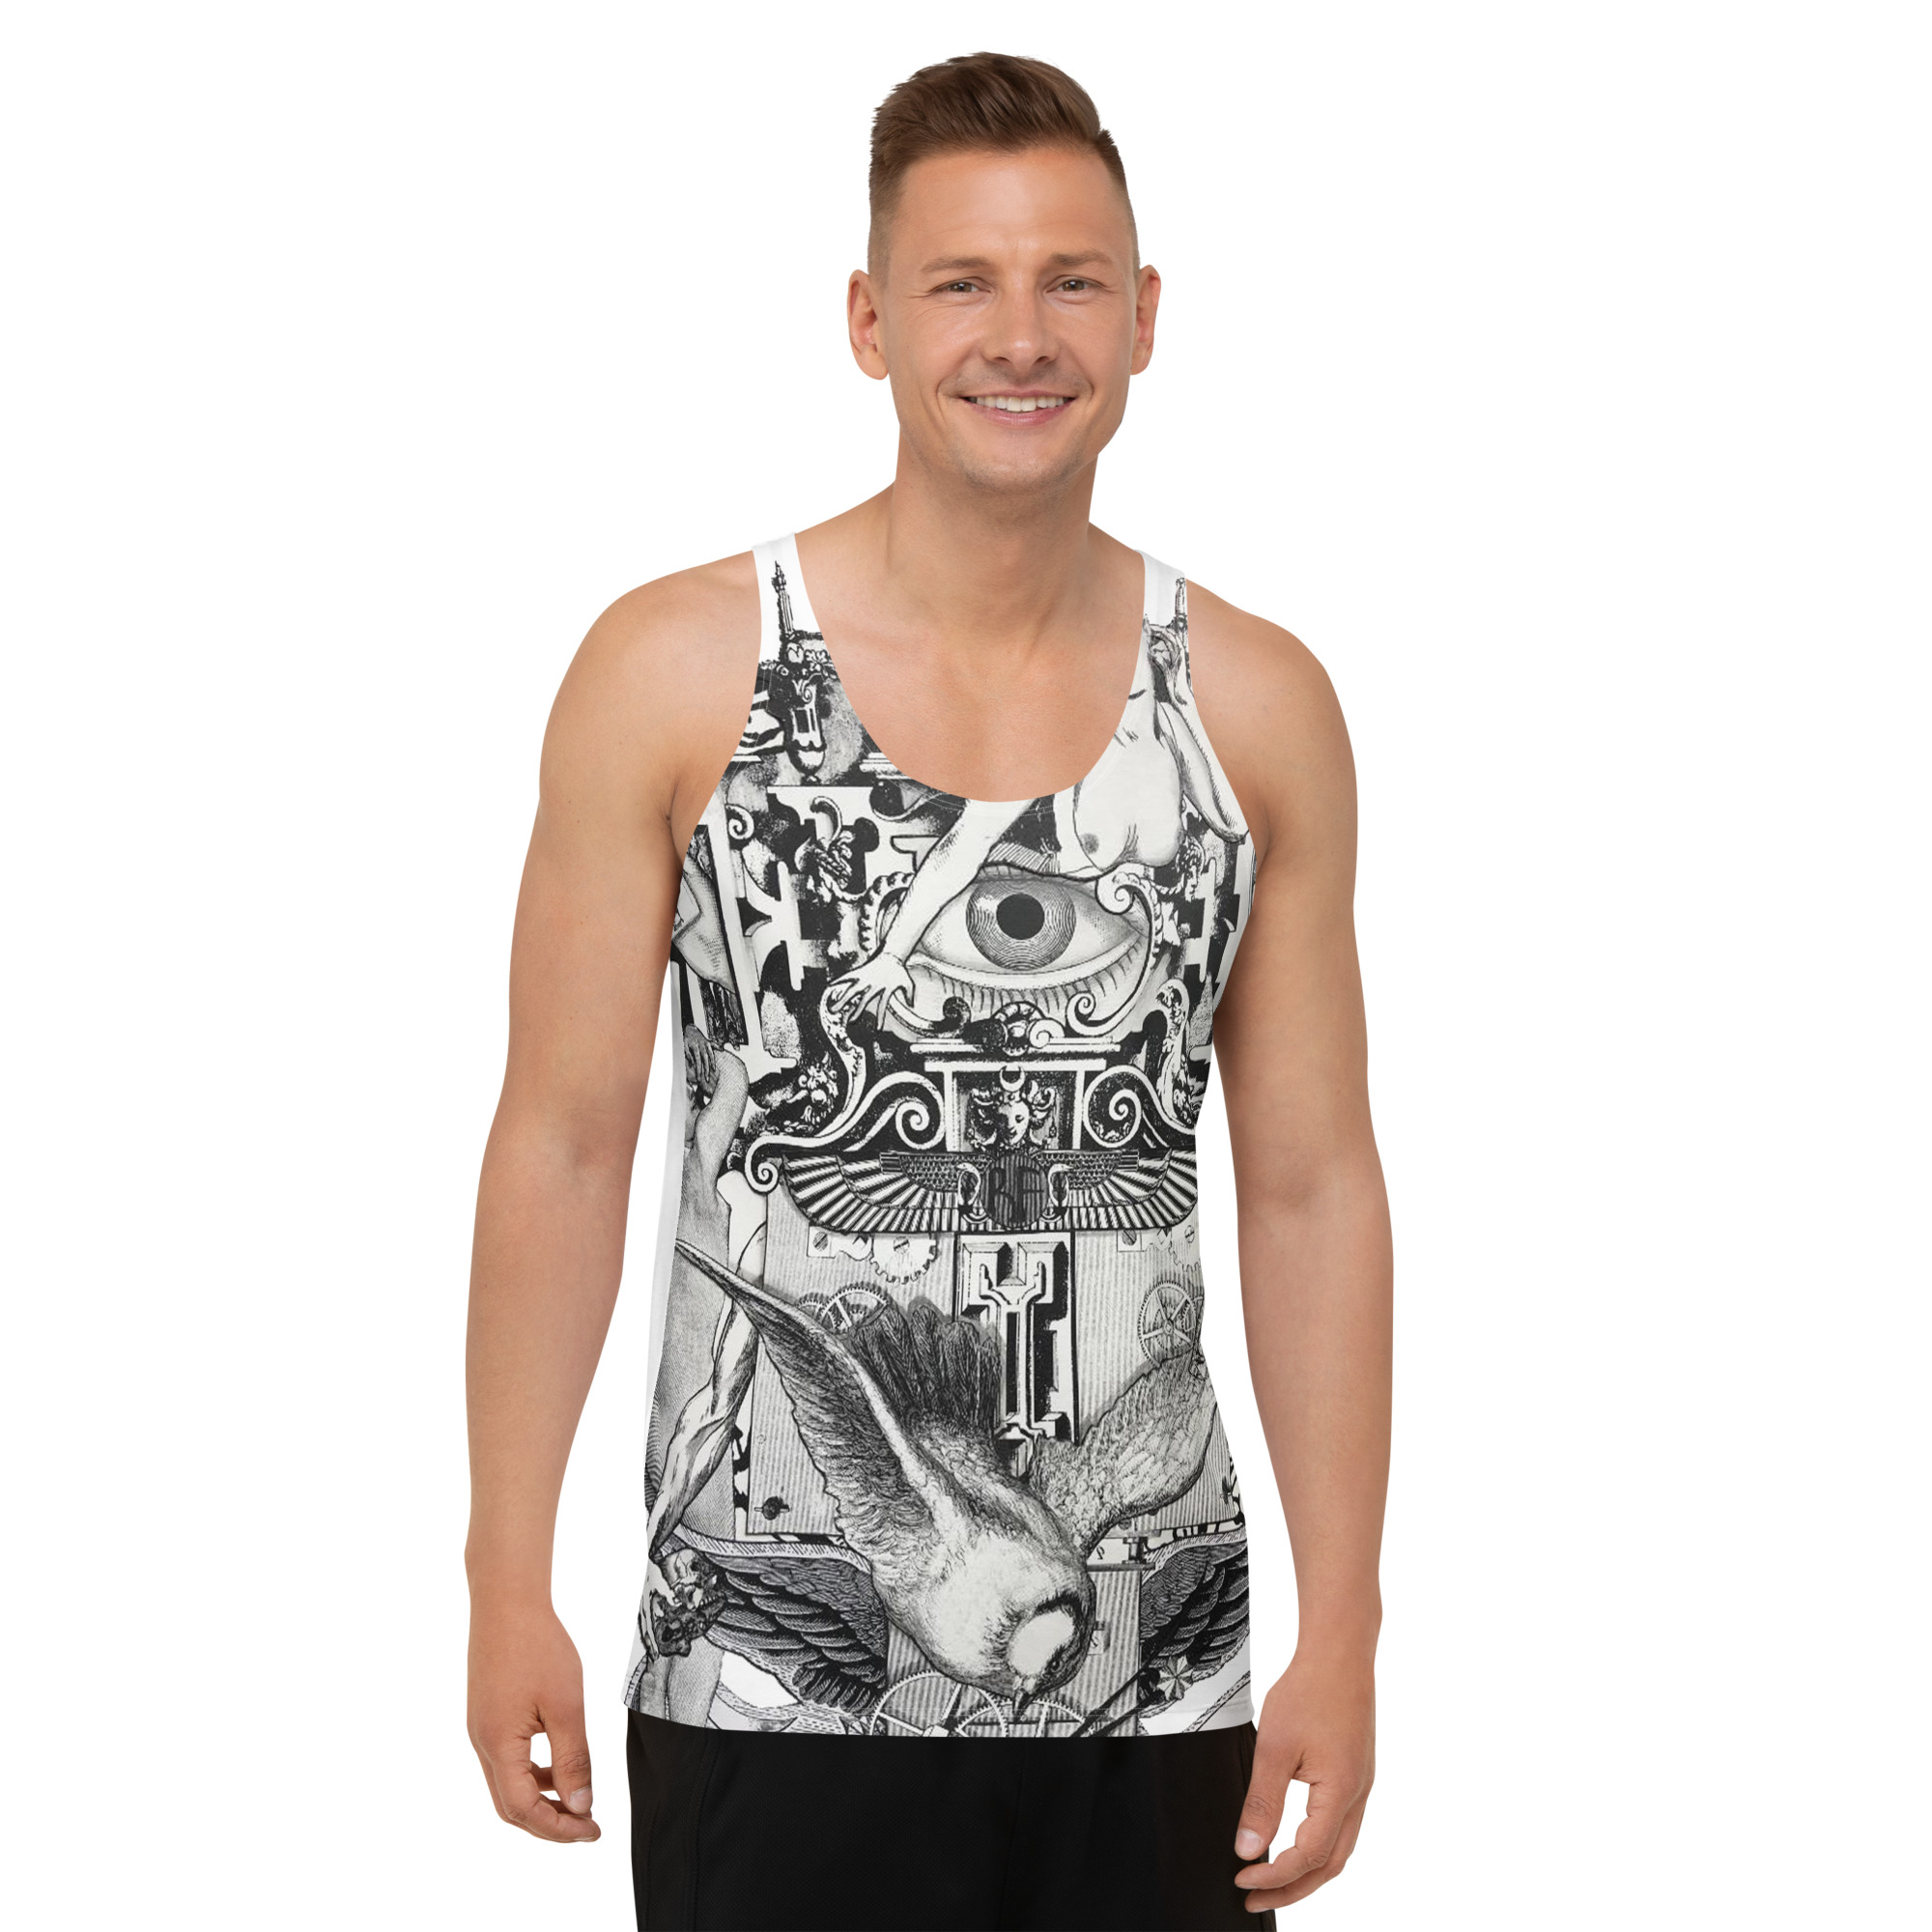 all-over-print-mens-tank-top-white-front-6365958d161bf.jpg